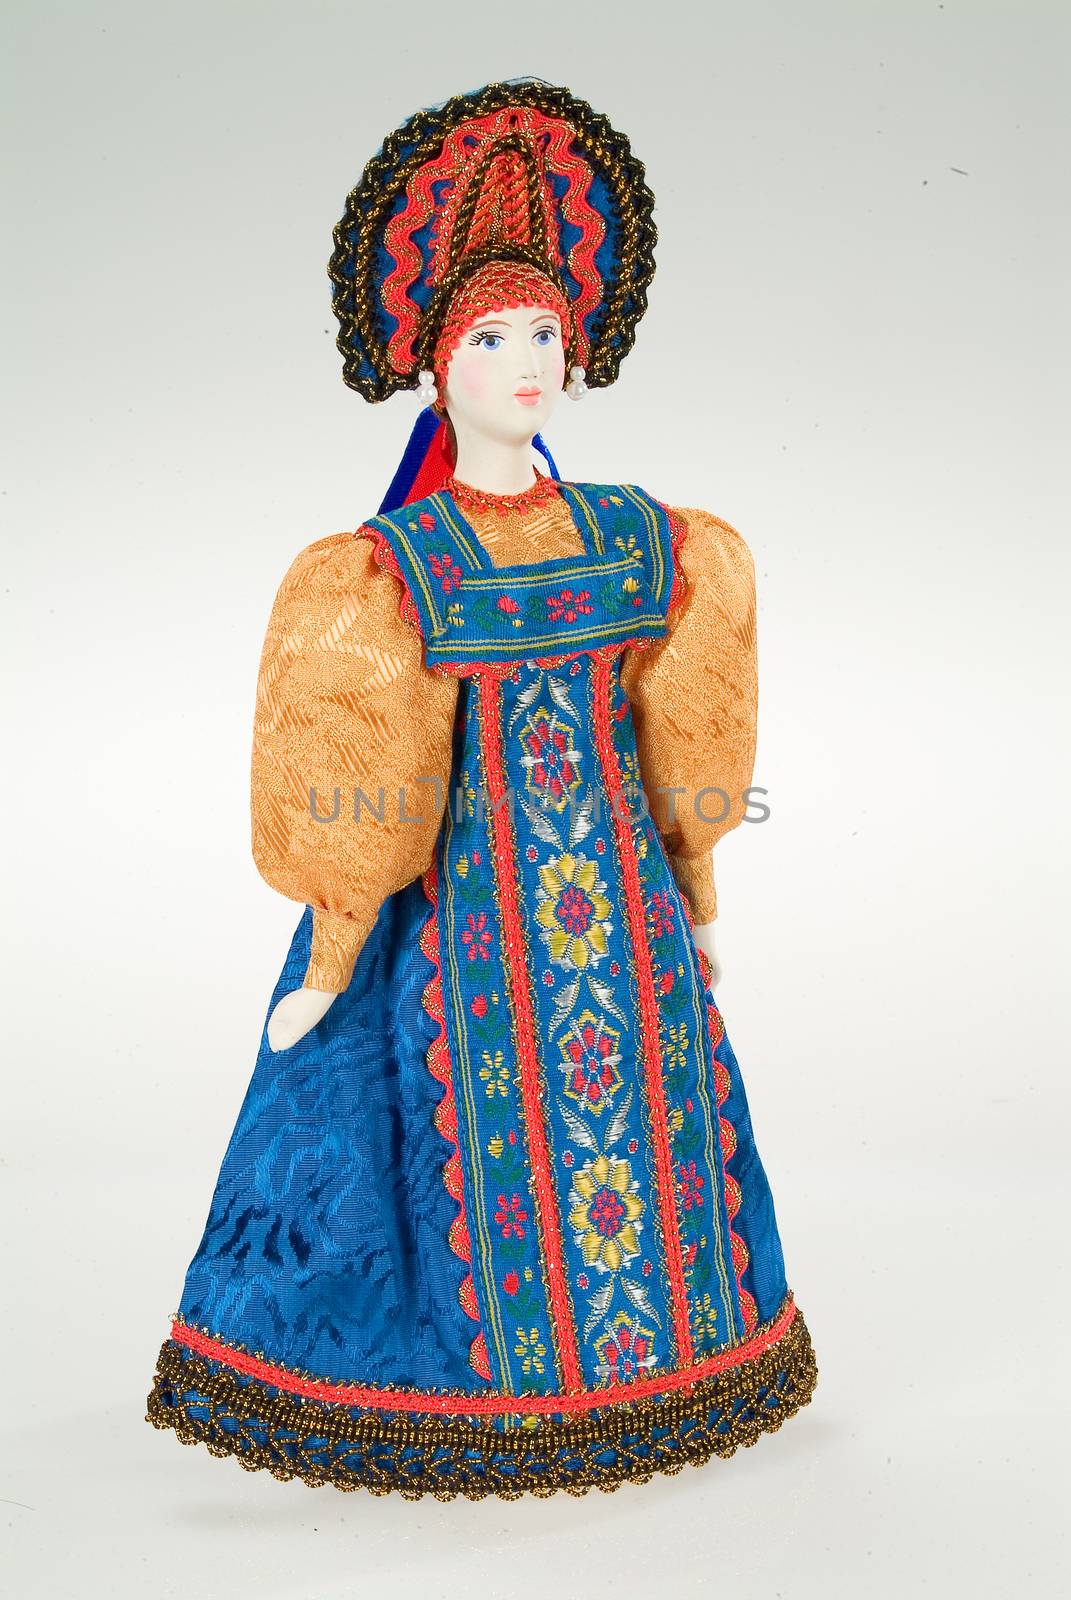 Old Russian traditional folk doll on a studio background